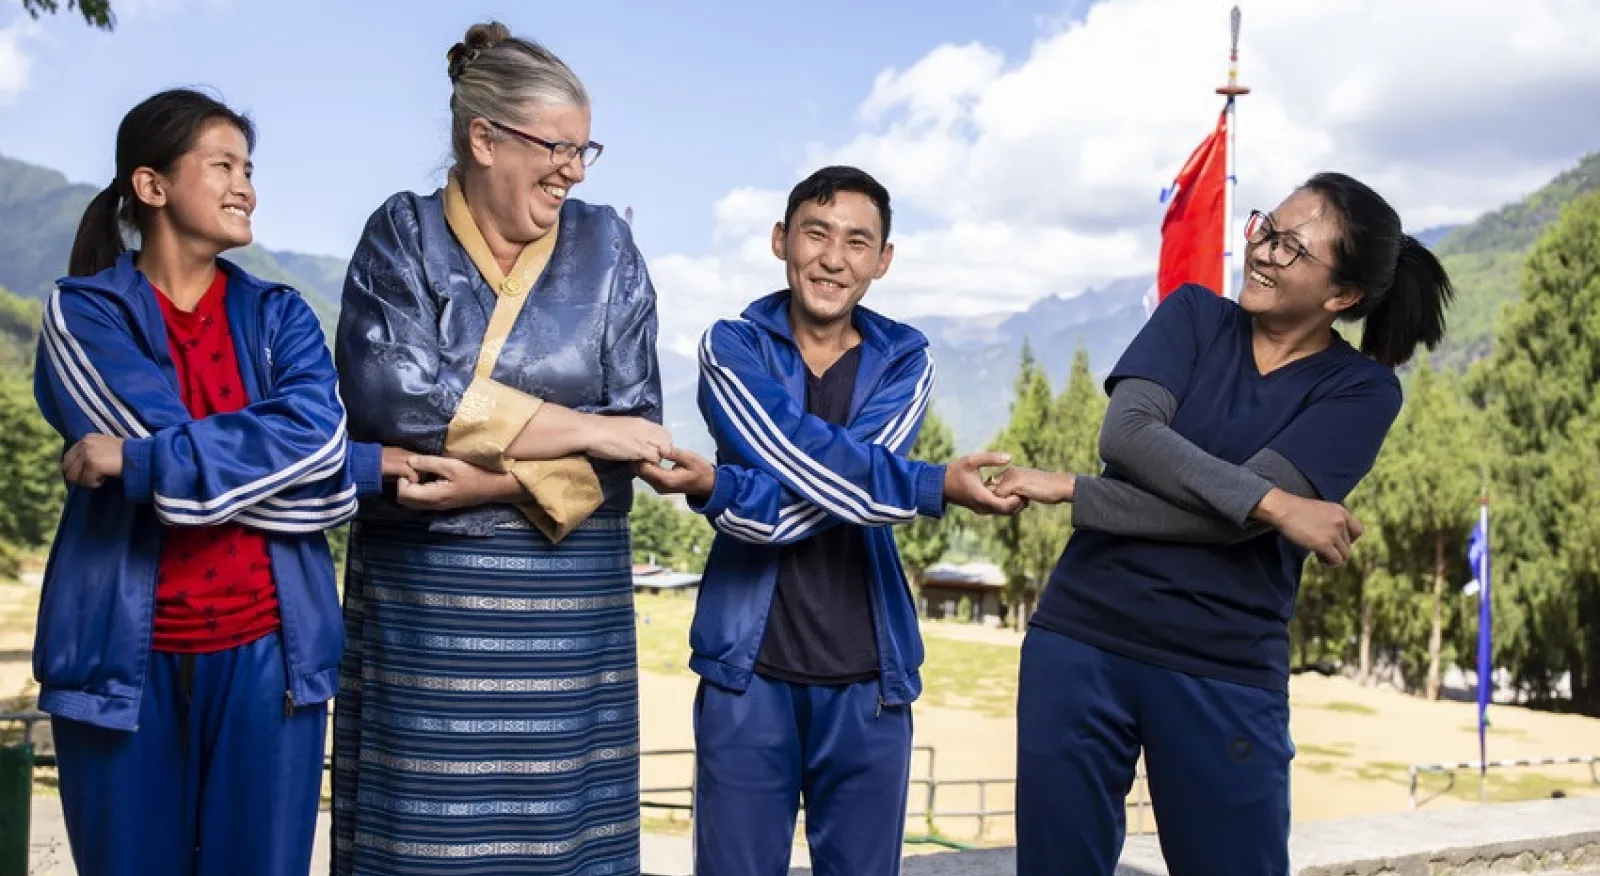 Four people in blue and red traditional Bhutanese clothing smiling and laughing while standing in front of a mountainous background.